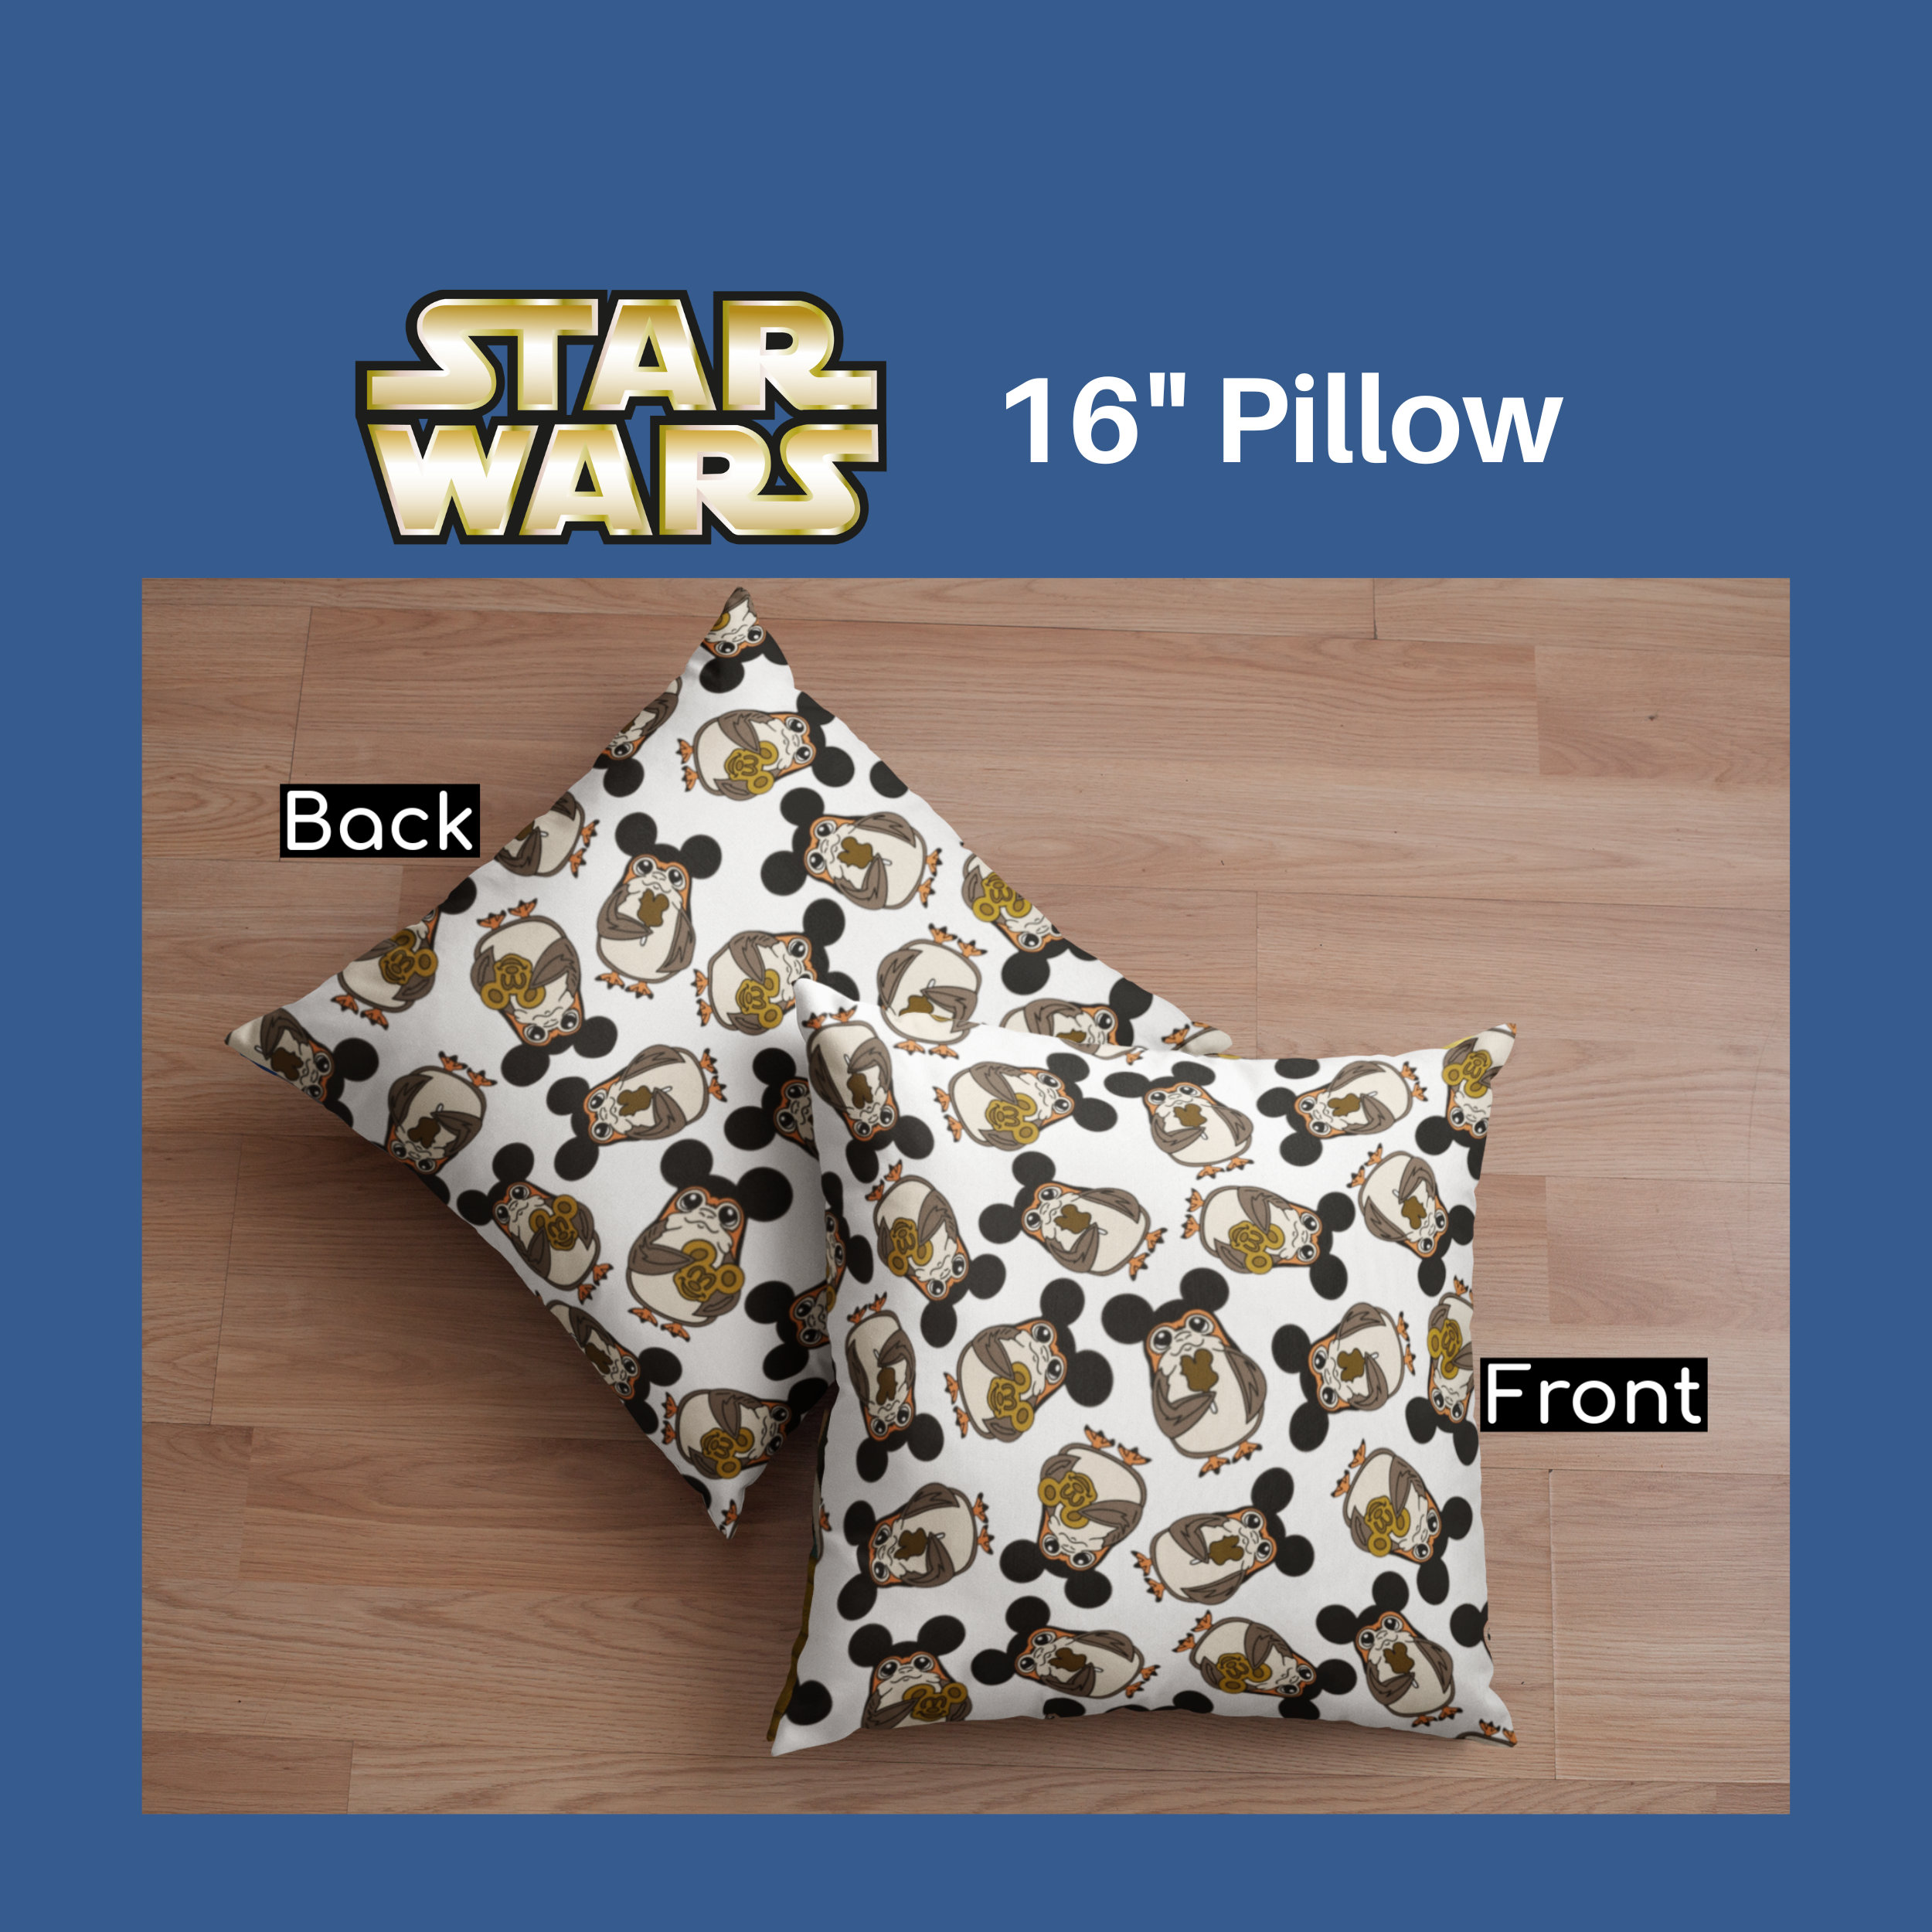 Chewie and Porg - Throw Pillow